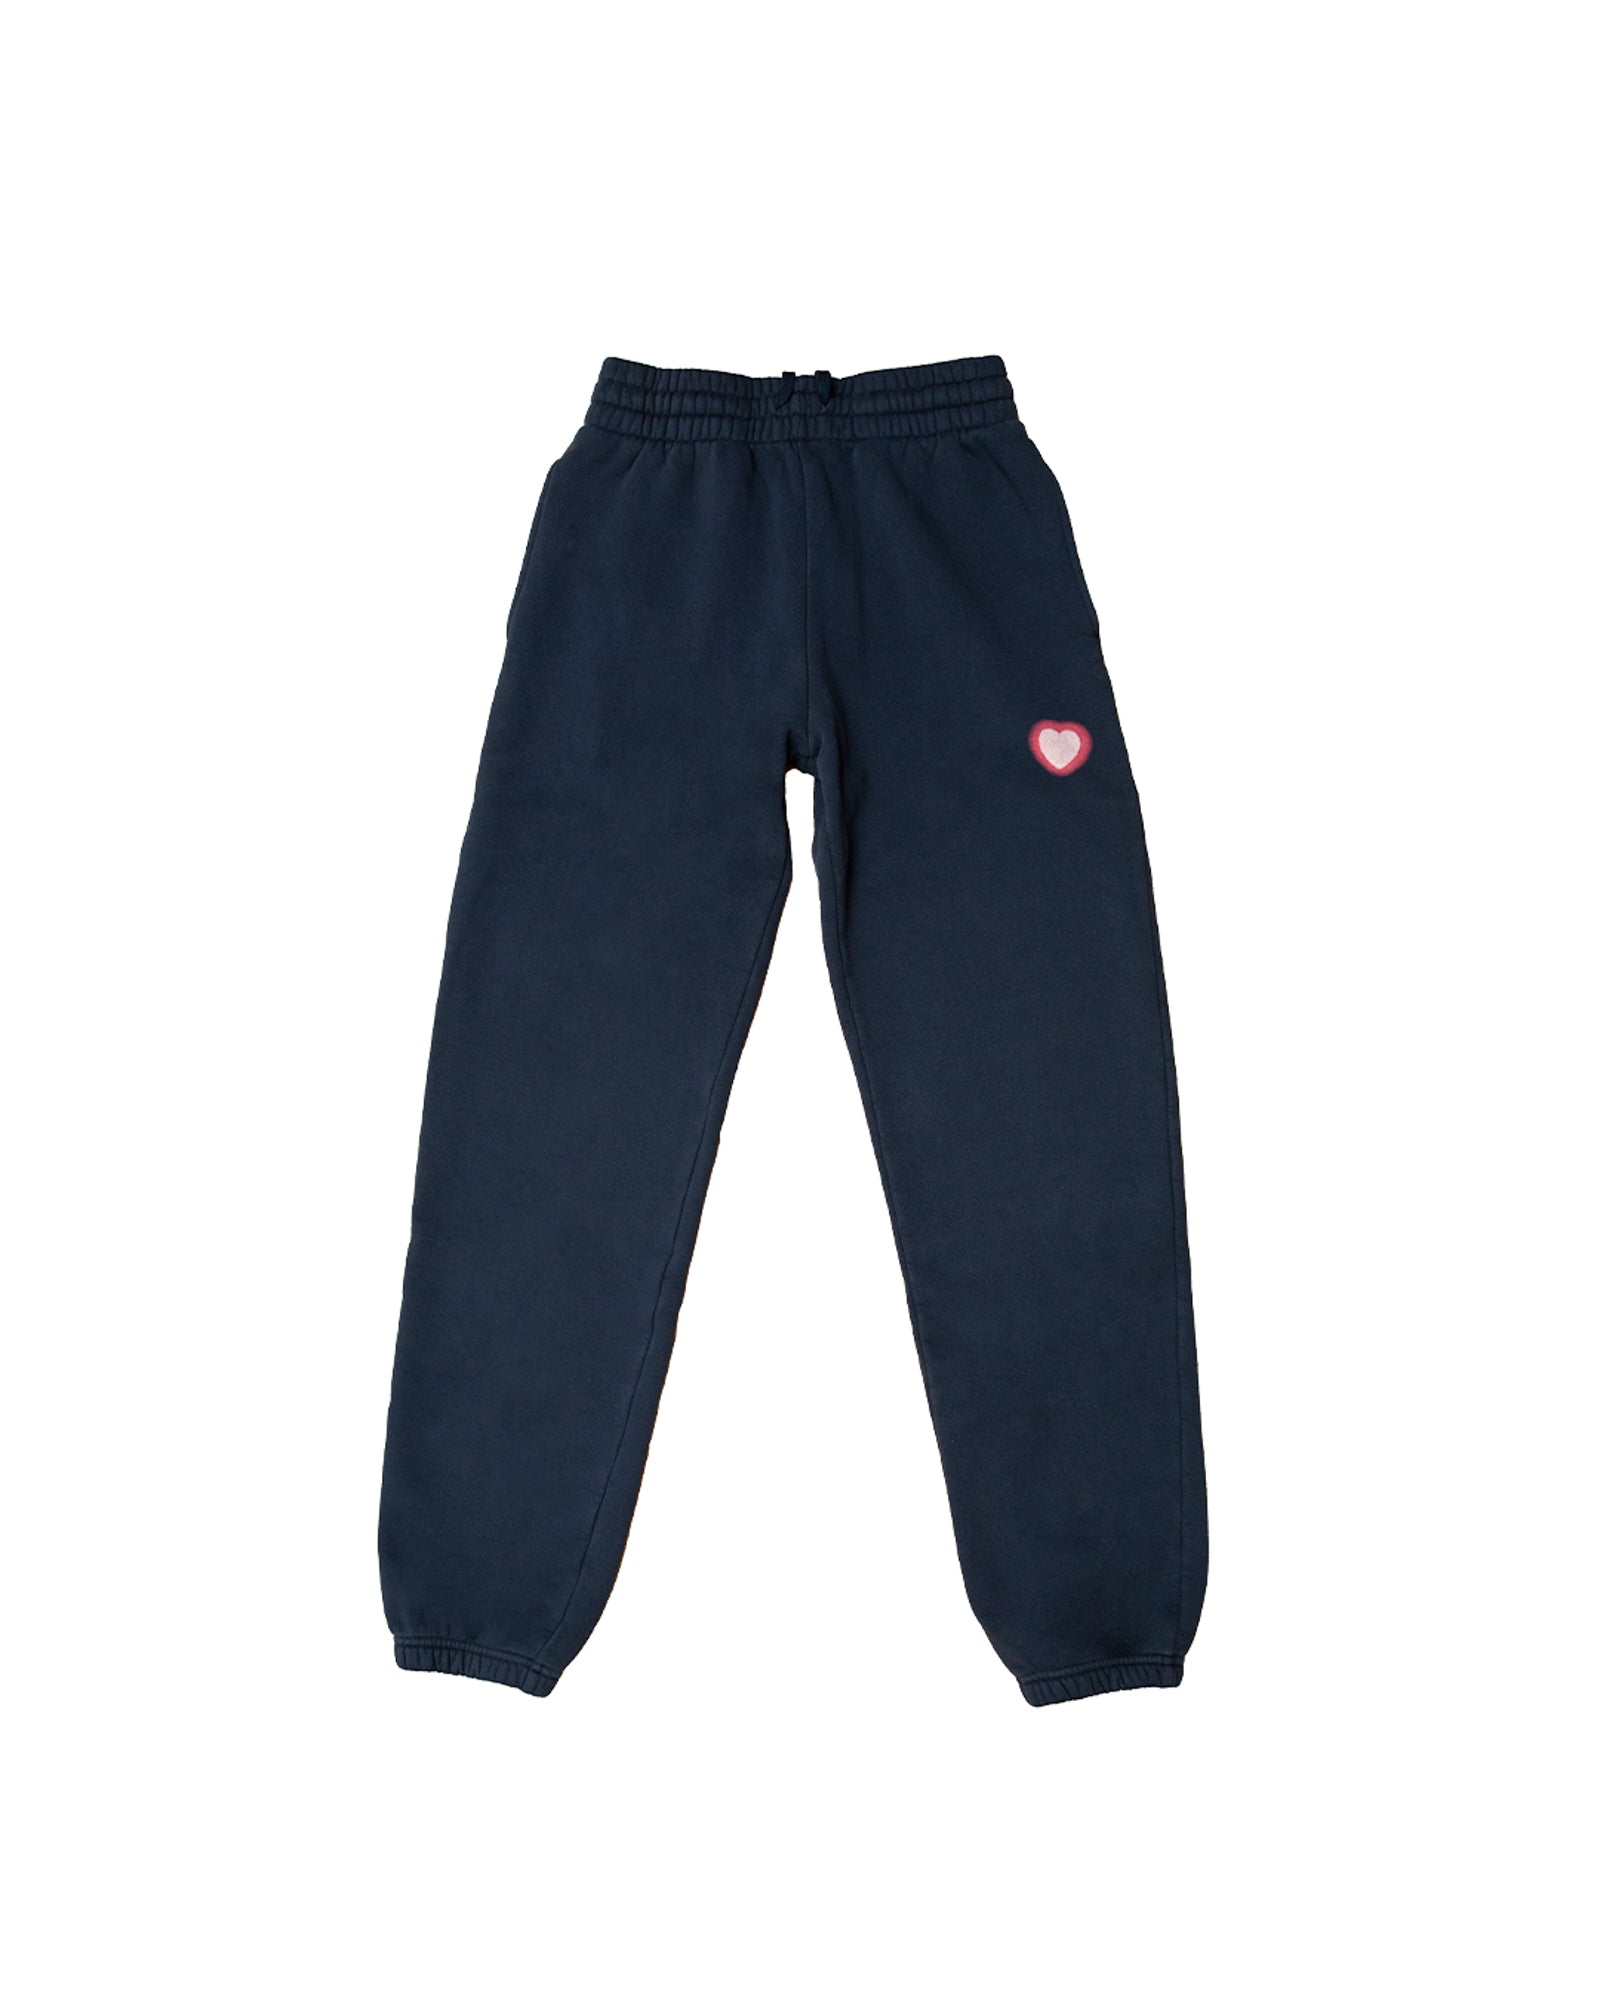 LOVER'S UNIFORM PANT IN MIDNIGHT